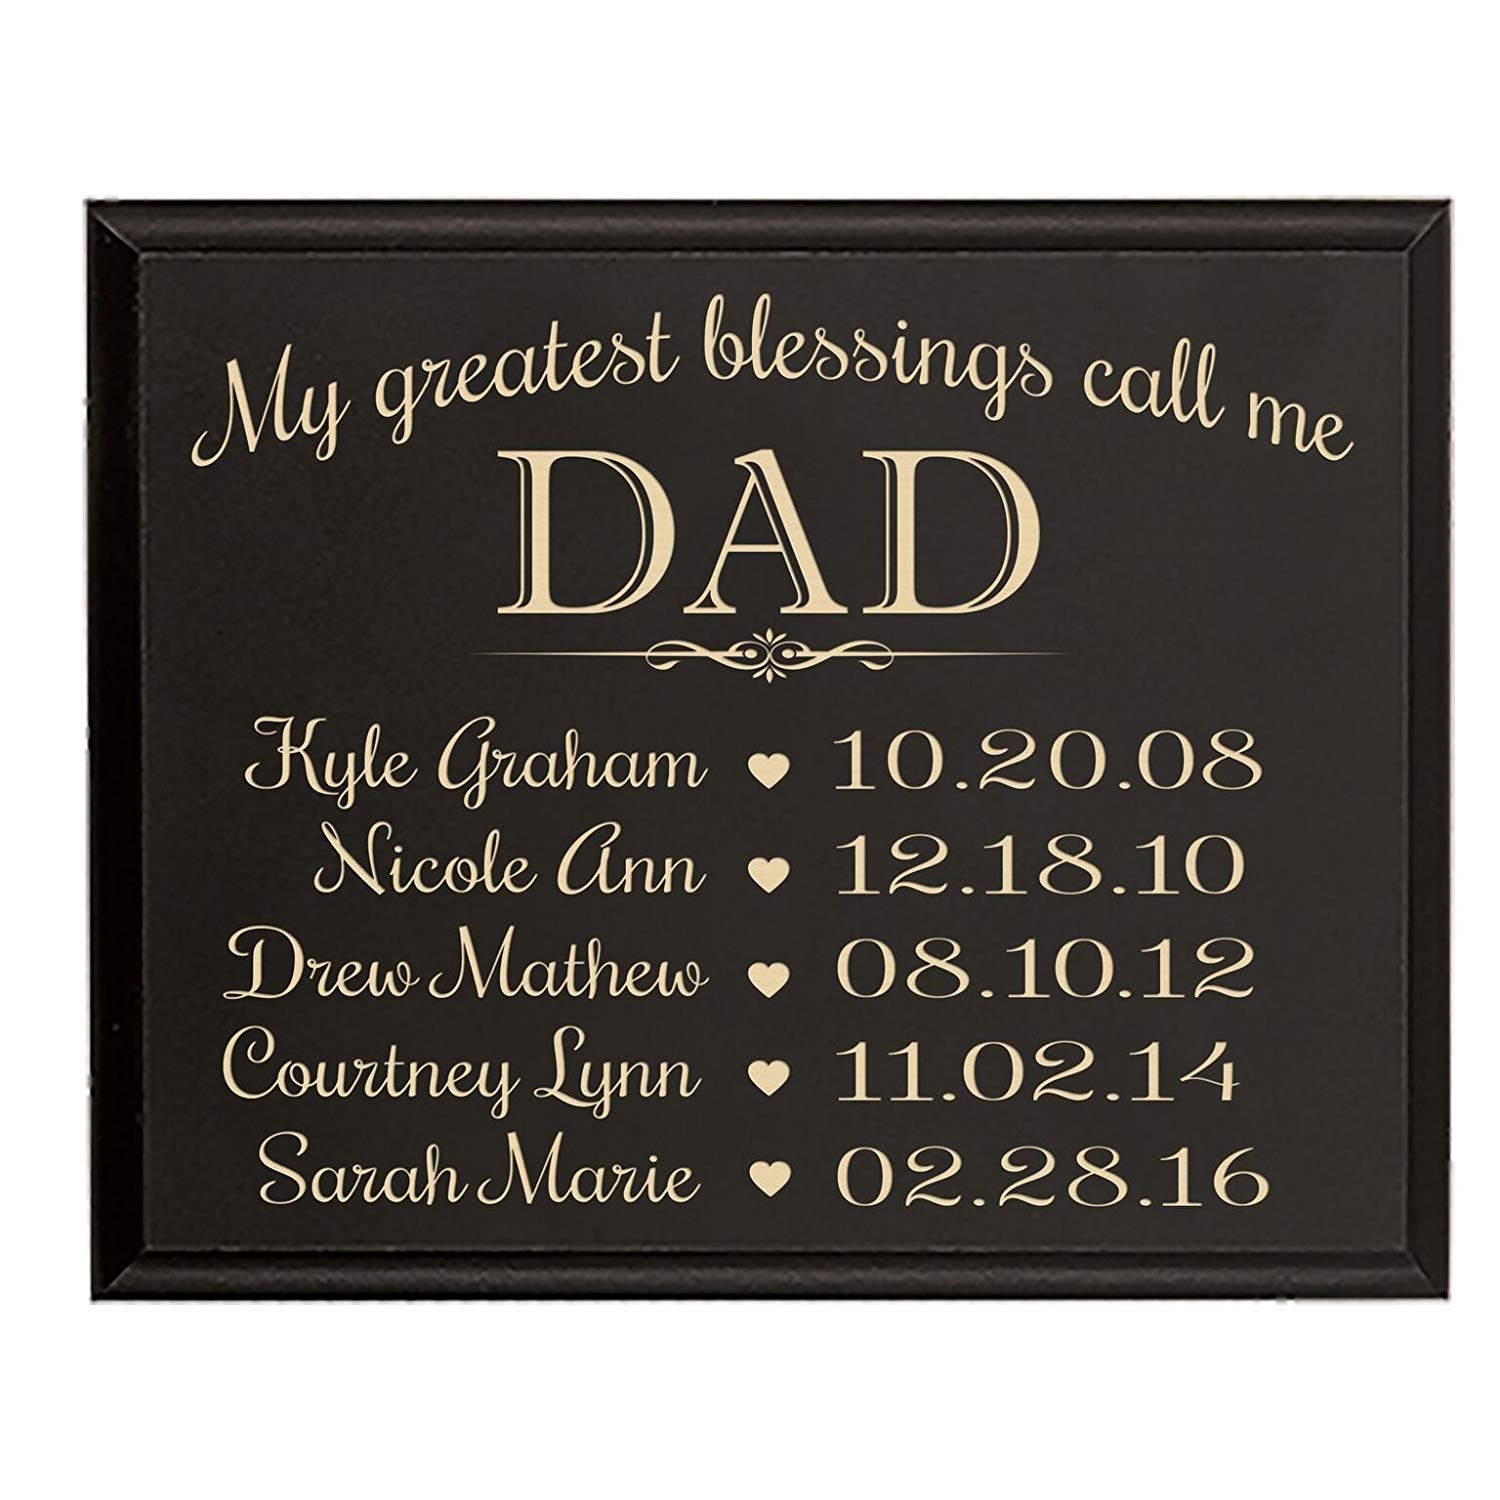 Personalized Hanging Wall Plaque For Dad - My Greatest Blessings - LifeSong Milestones